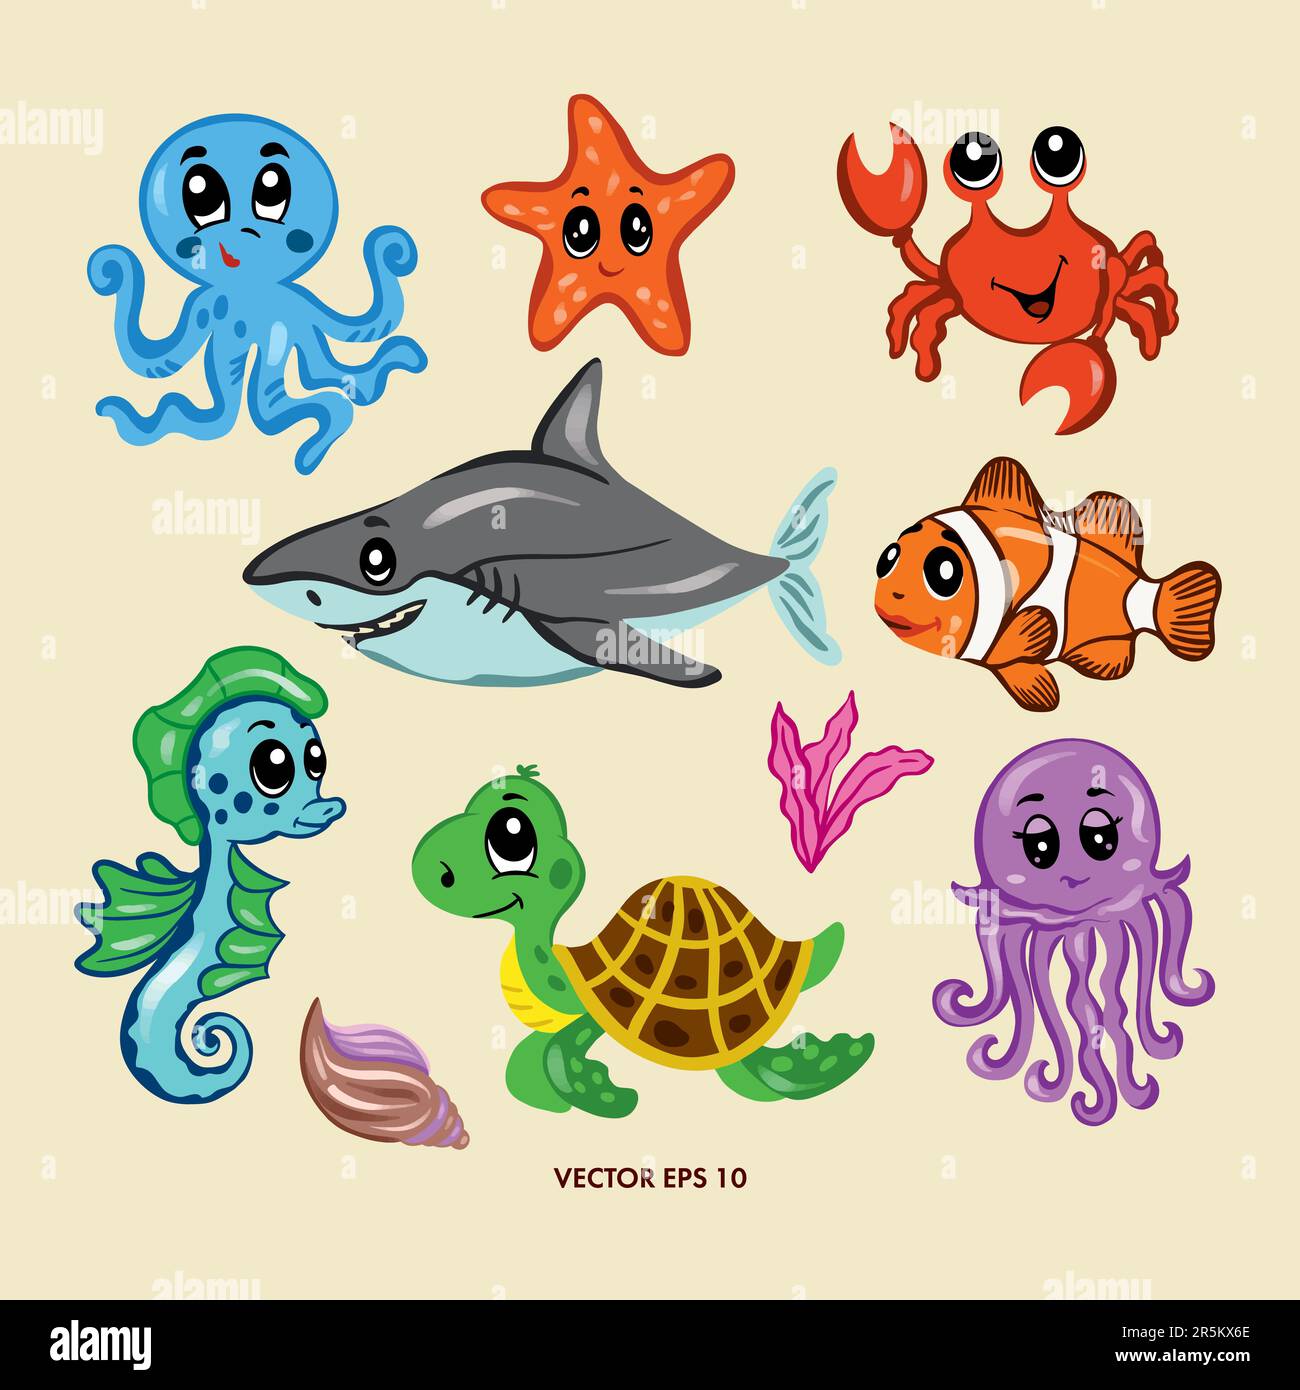 Vector set of sea animals. Octopus, crab, shark, jellyfish, starfish, seahorse, turtle, fish. Covers, greeting cards, banners, wall decor. Stock Vector